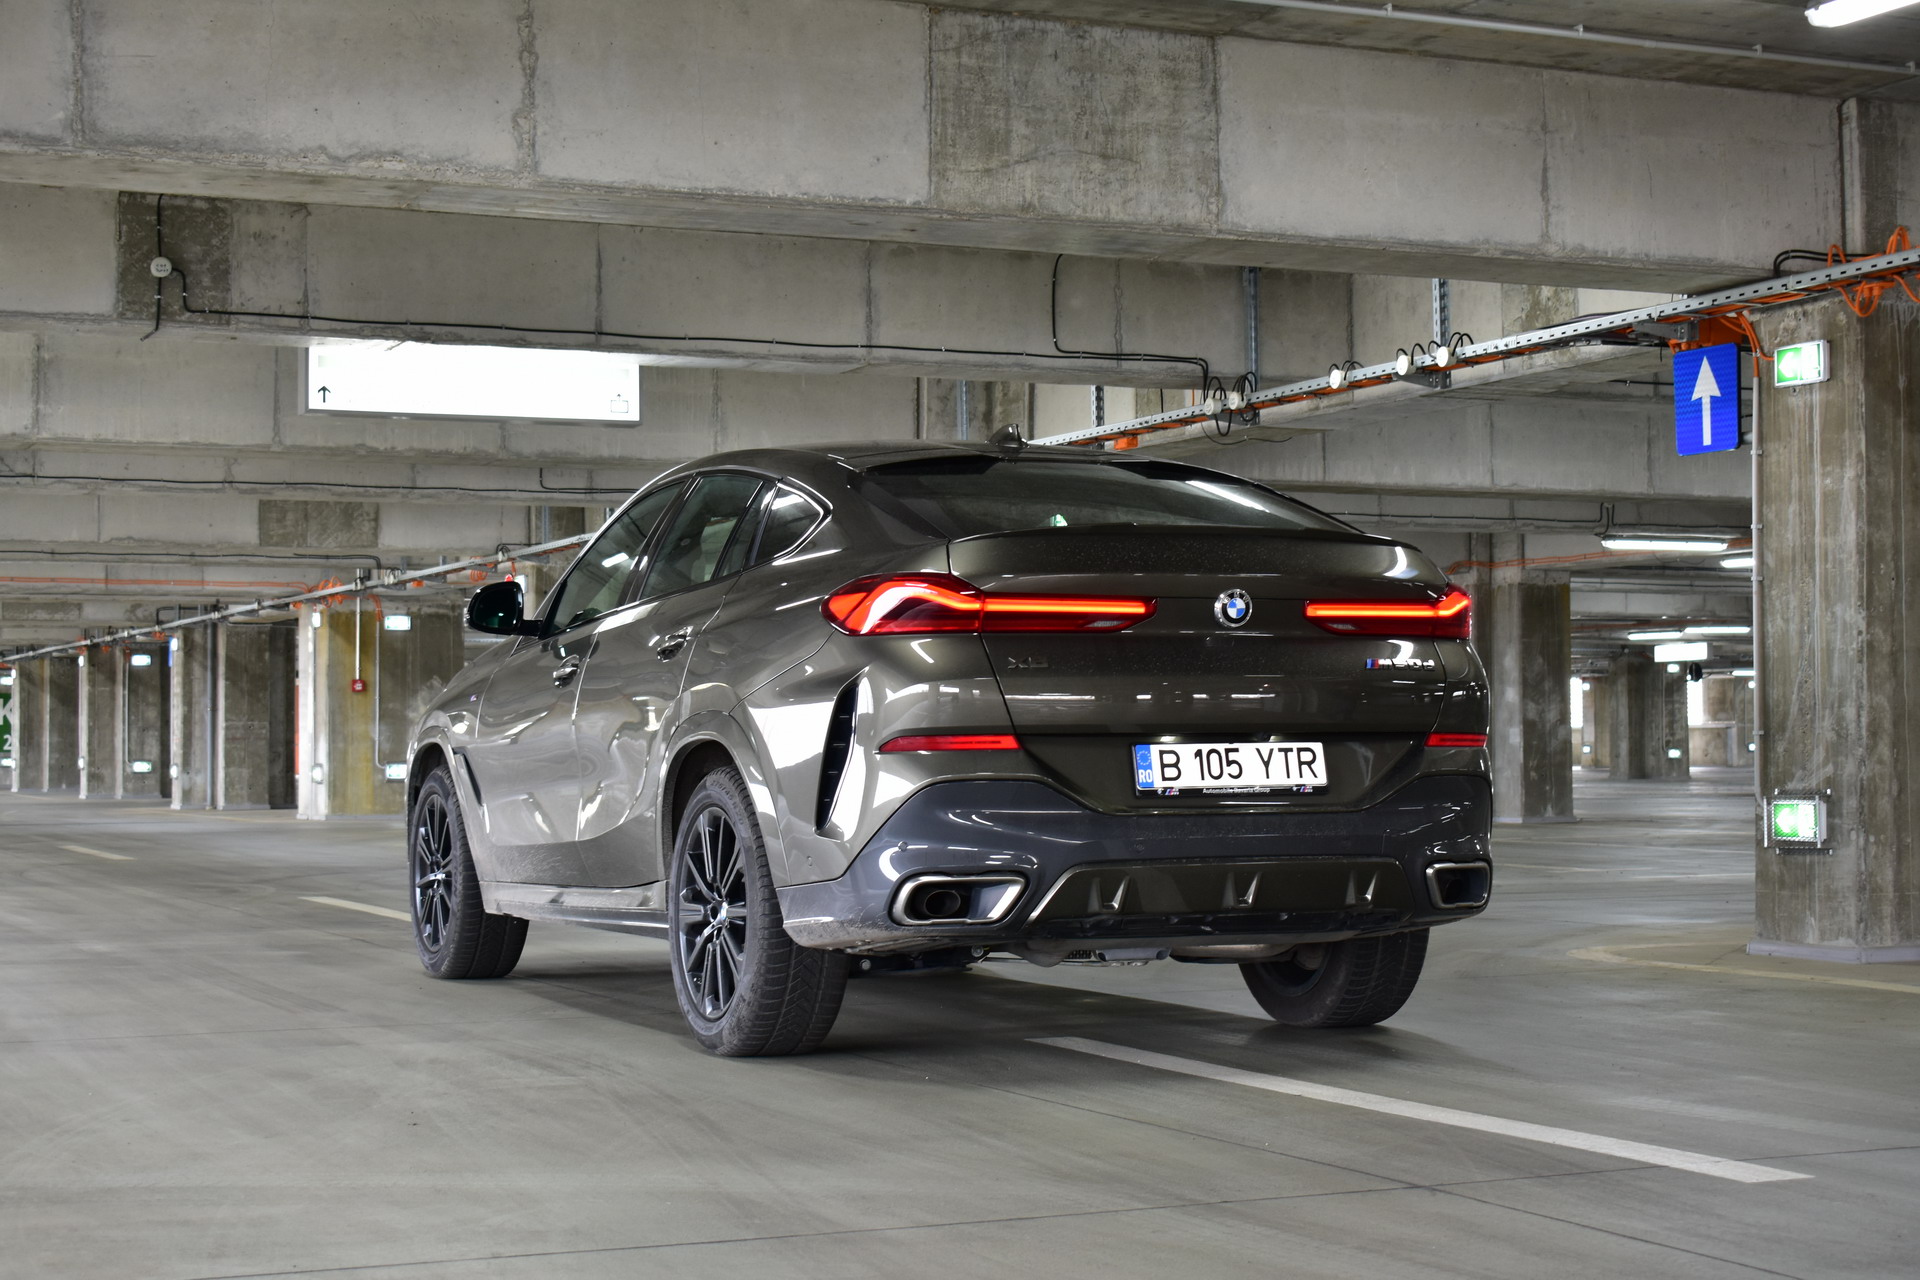 BMW X6 M50d: 0-250 km/h acceleration on the German Autobahn – Cars and News